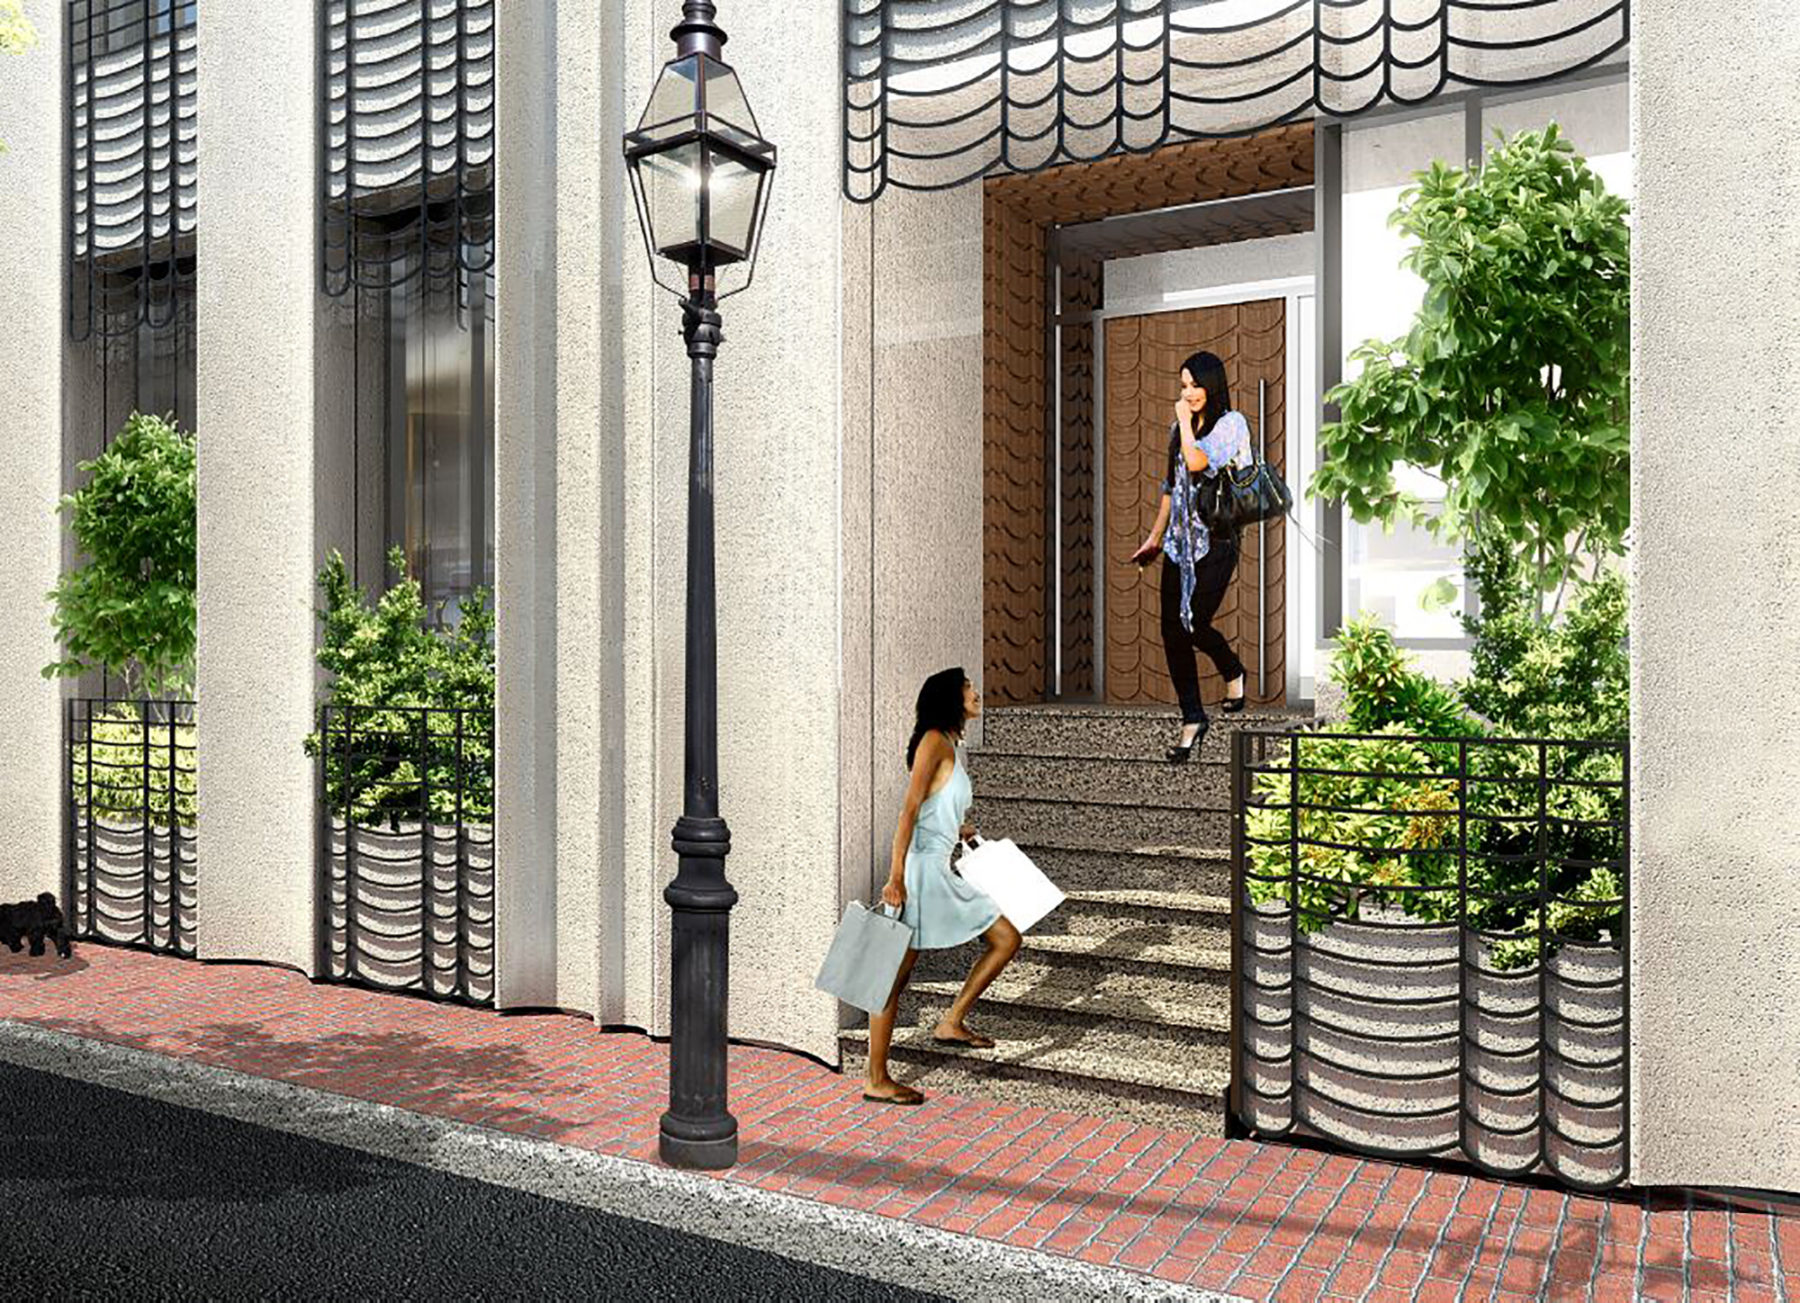 streetscape rendering of exterior